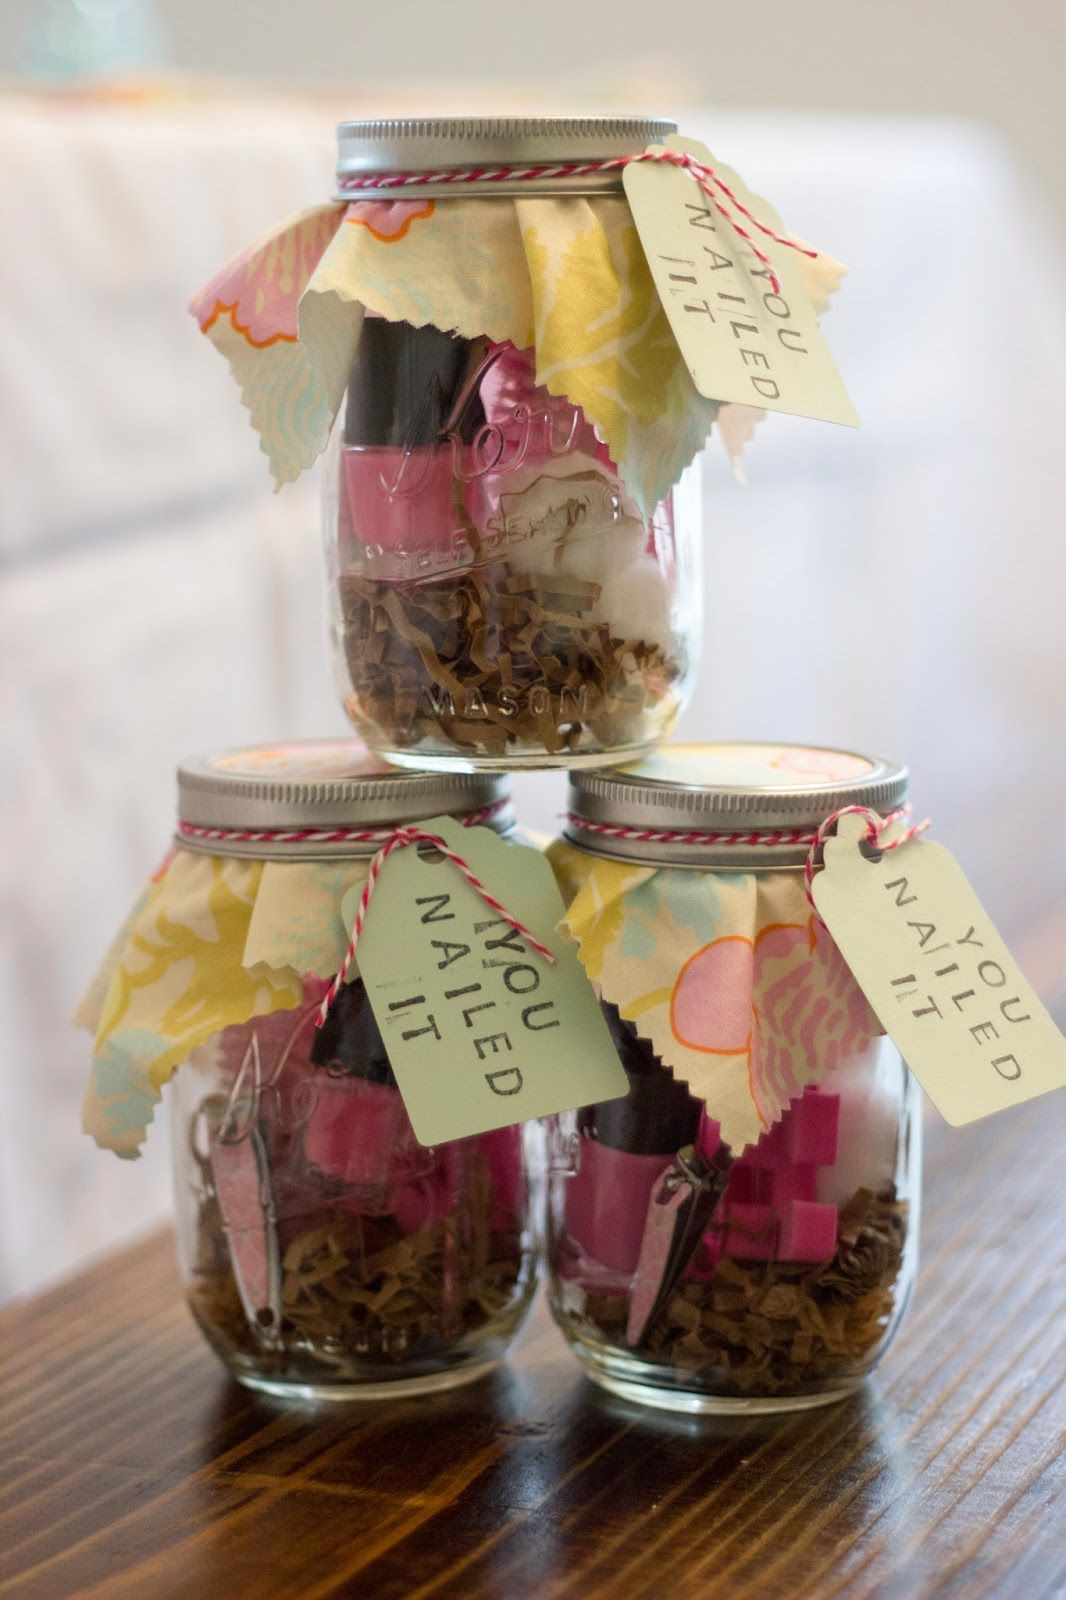 Mason Jar Gift Ideas For Baby Shower
 Wright By Me You Nailed It Manicure set in a mason jar